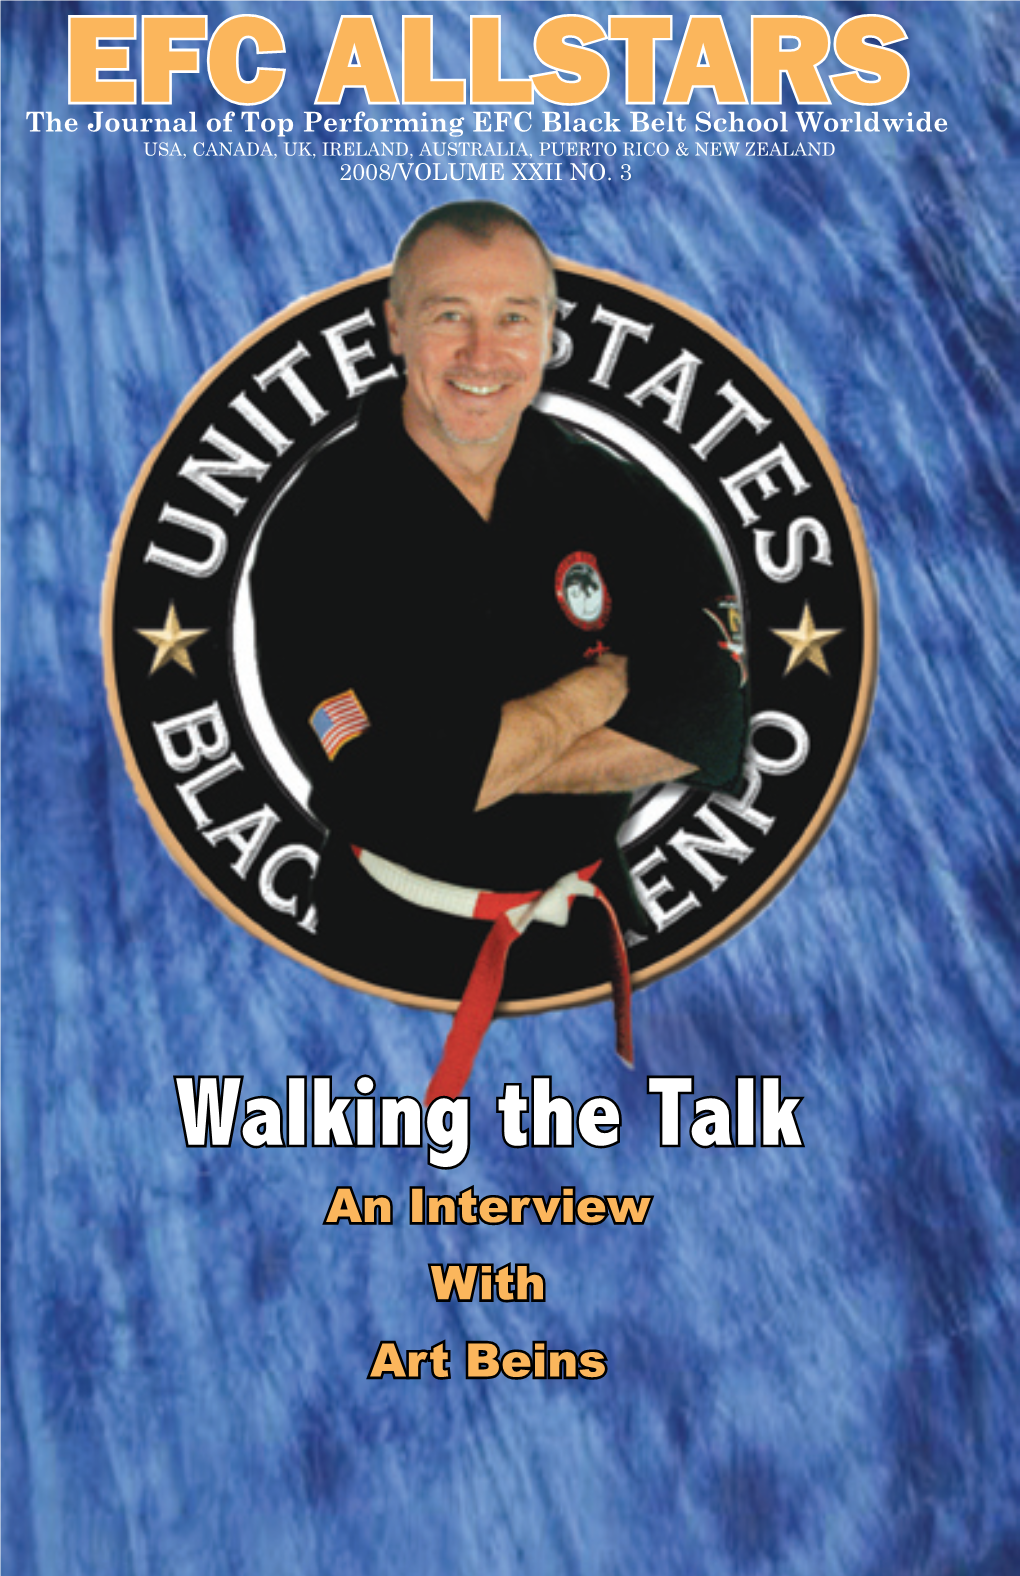 EFC Allstars Is a Journal Documenting the Top Performing EFC USA Martial Arts Schools Worldwide